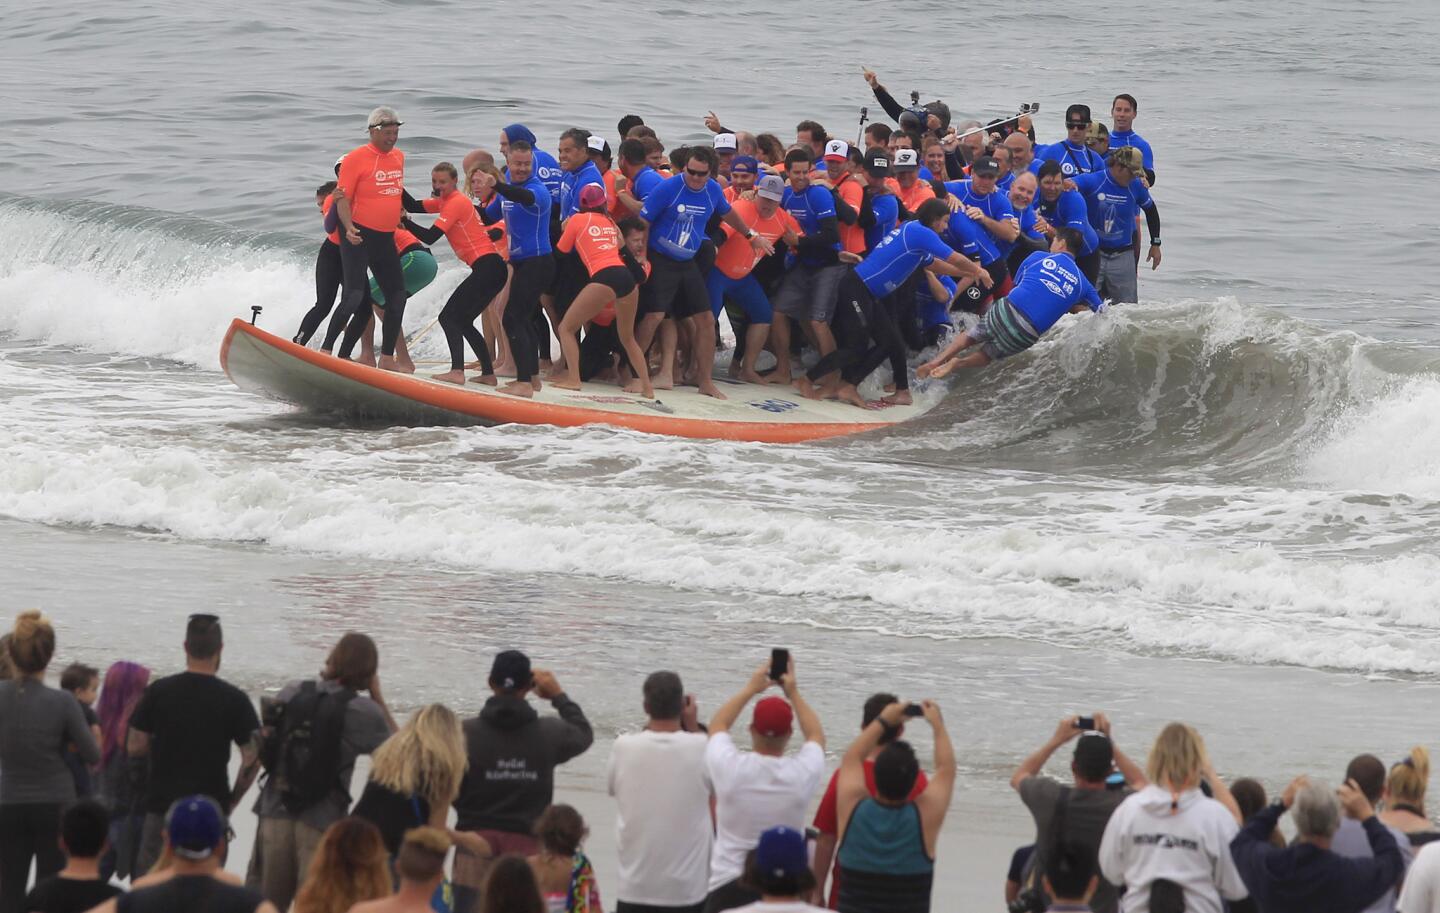 Sixty-six surfers attempt to break the record for most people on a surfboard and biggest surfboard, as crowds watch from the beach in Huntington Beach.